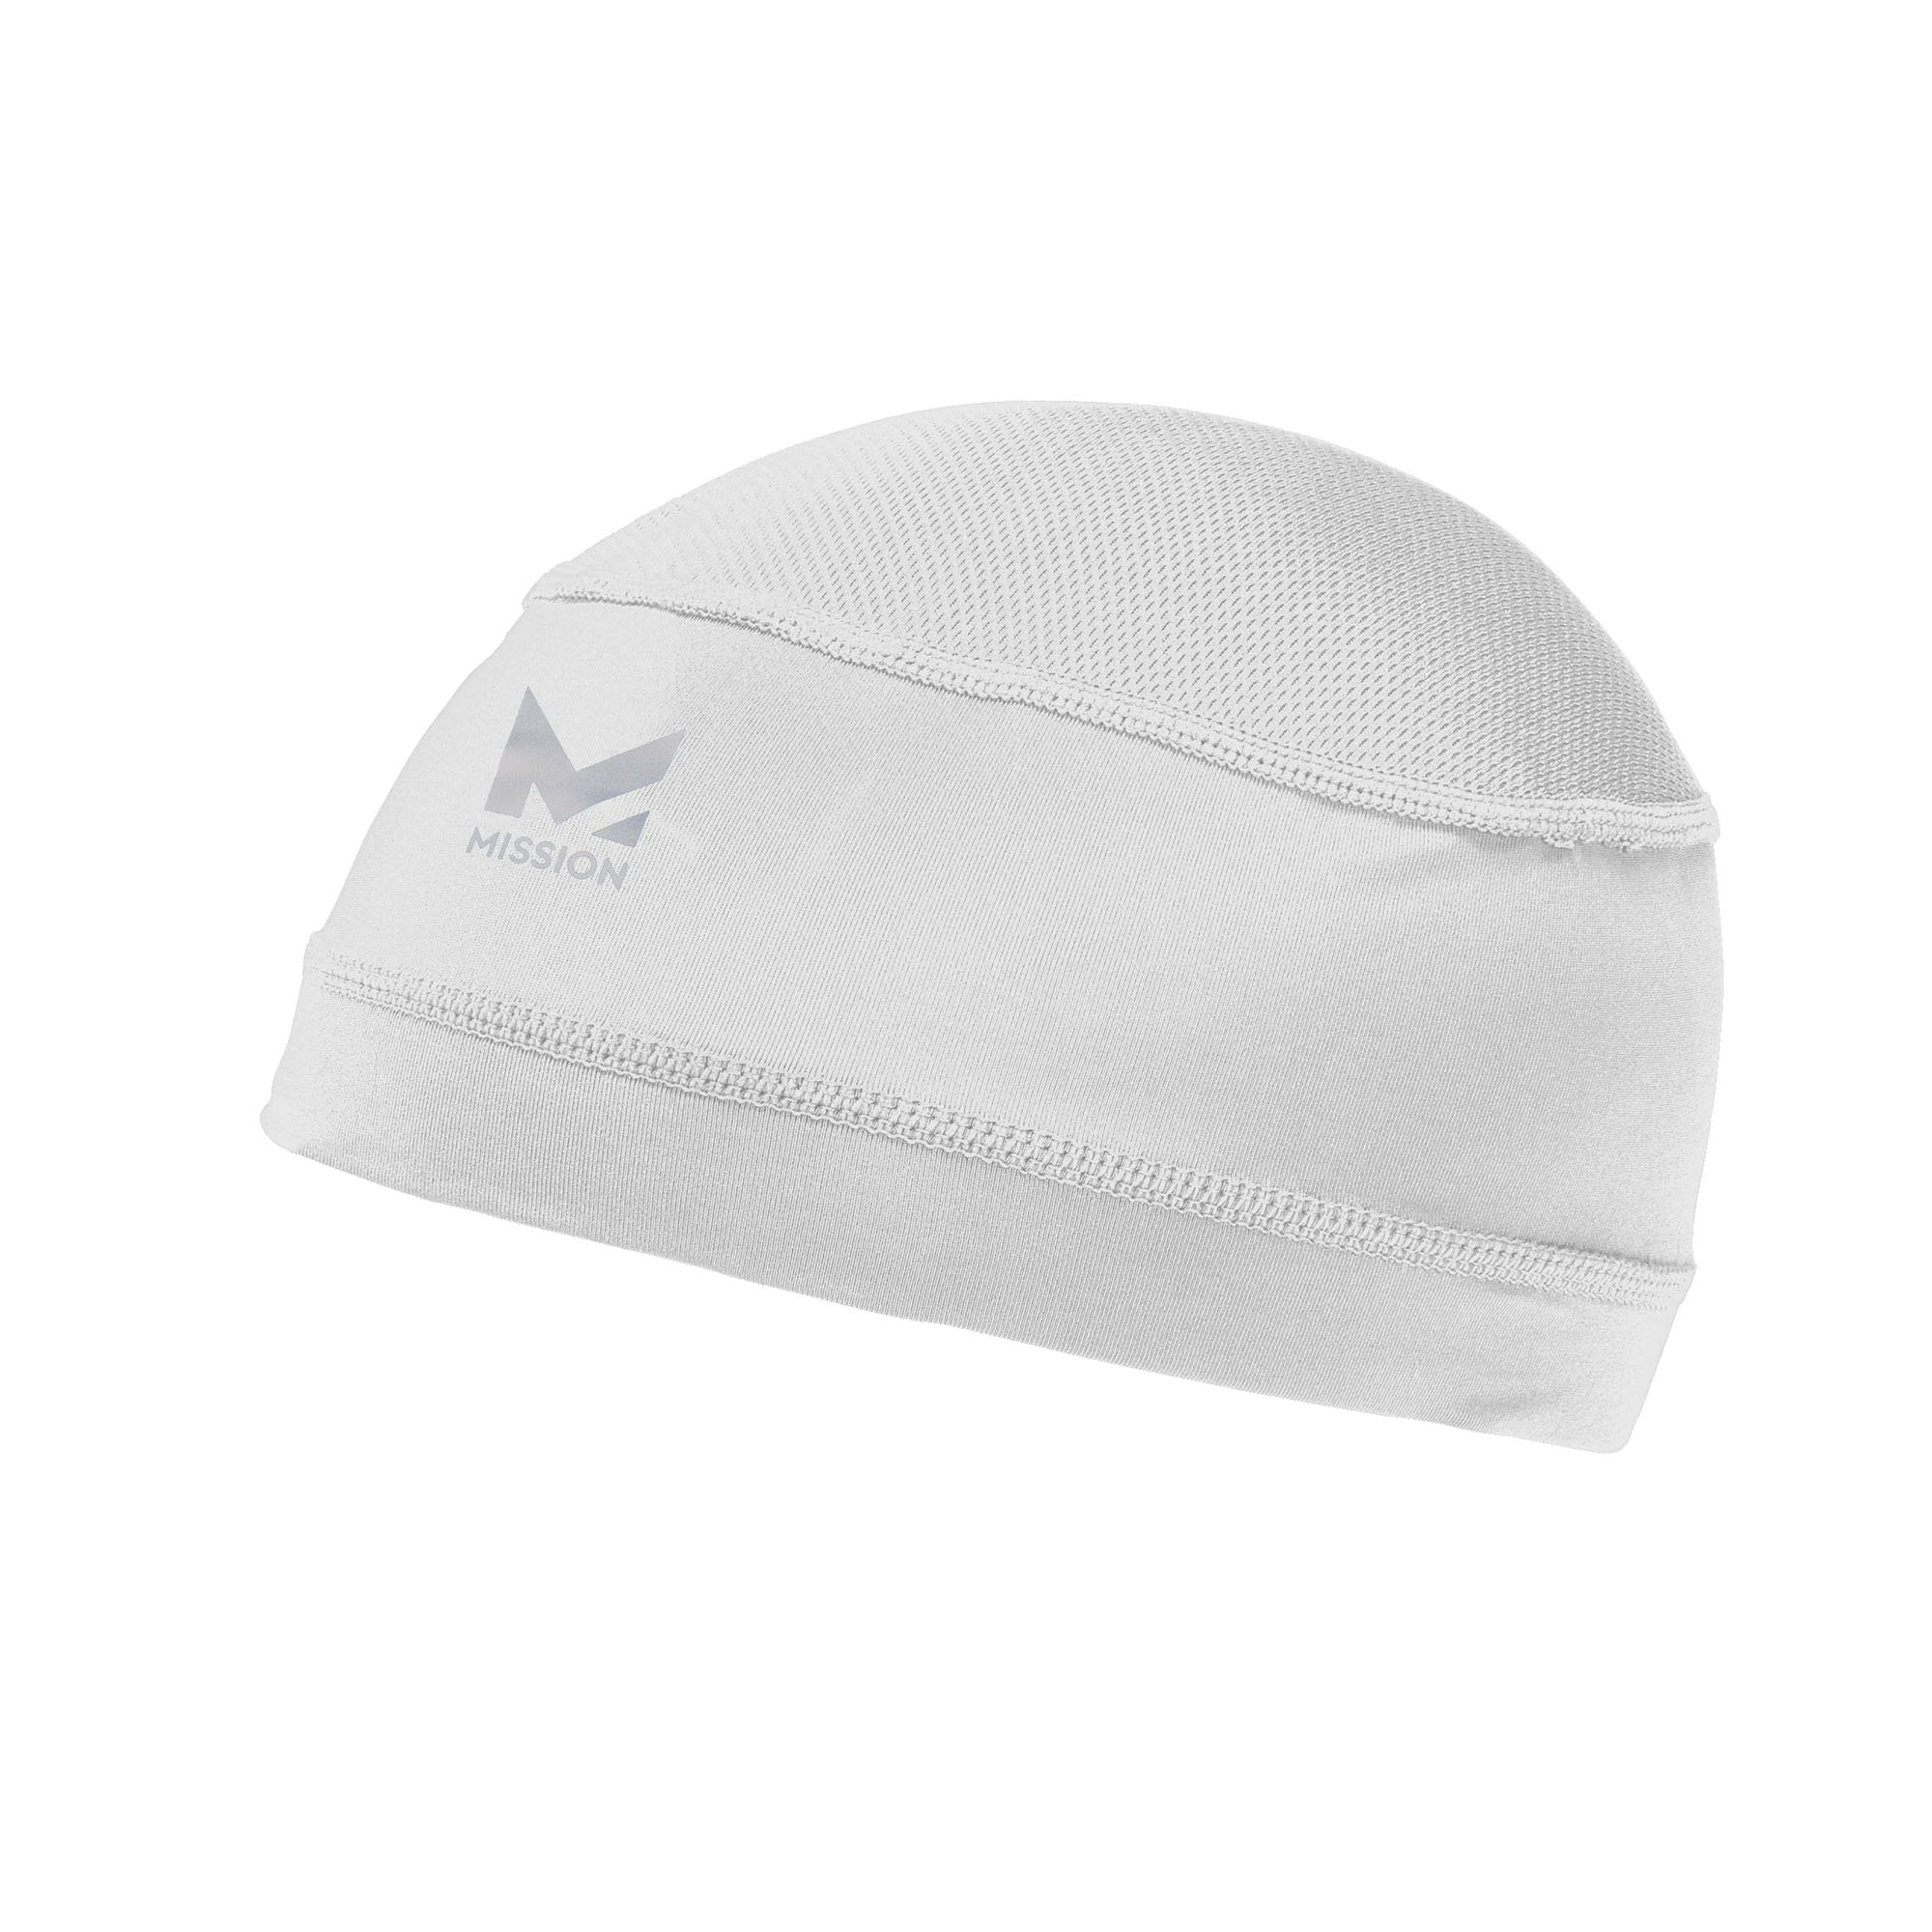 Cooling Helmet Liner Caps MISSION One Size White 